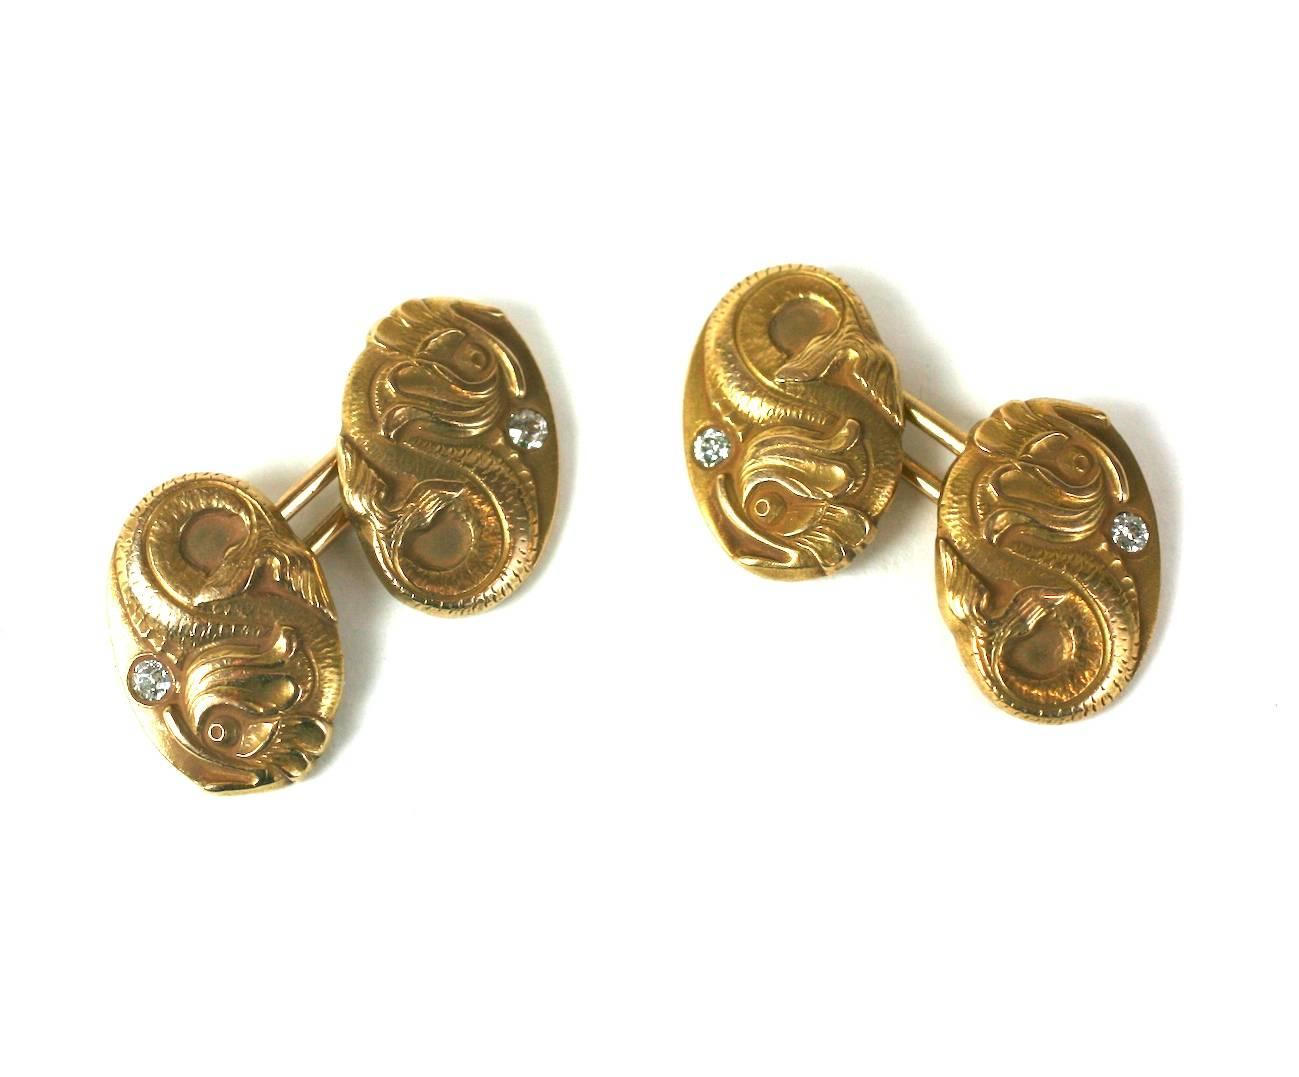 Art Nouveau Diamond Dolphin Cufflinks in 14k gold with diamonds. Exquisite quality and weight. Newark, N.J. 1890's USA. 5/8" x .5".  
Excellent condition.
8.7 dwt.